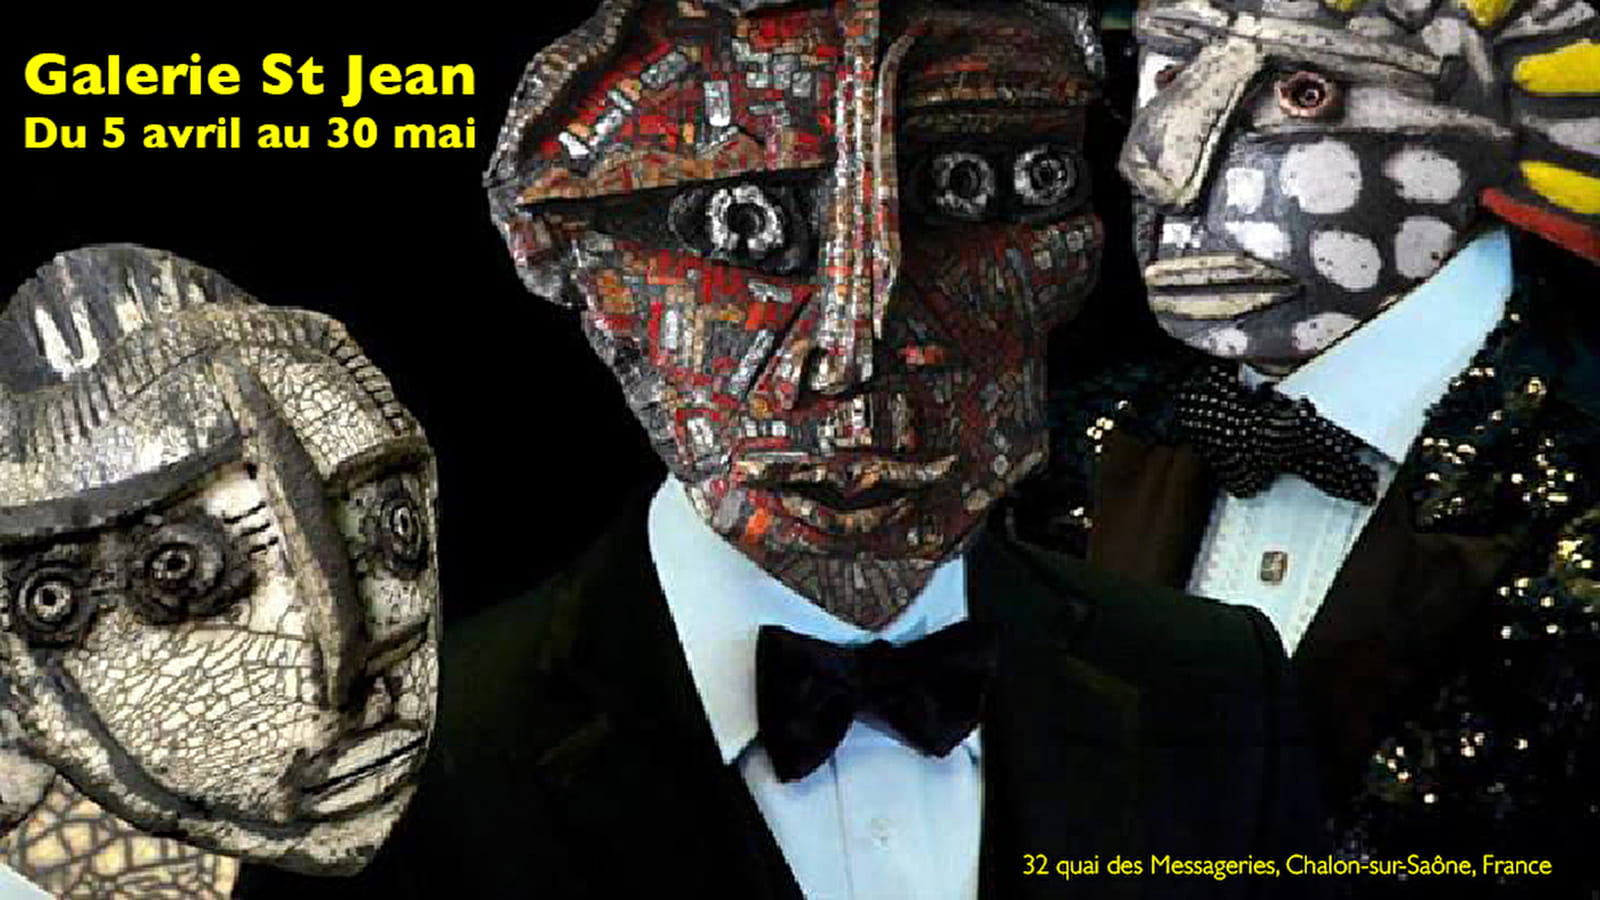 Exhibition by D. Allain and H. Guibal